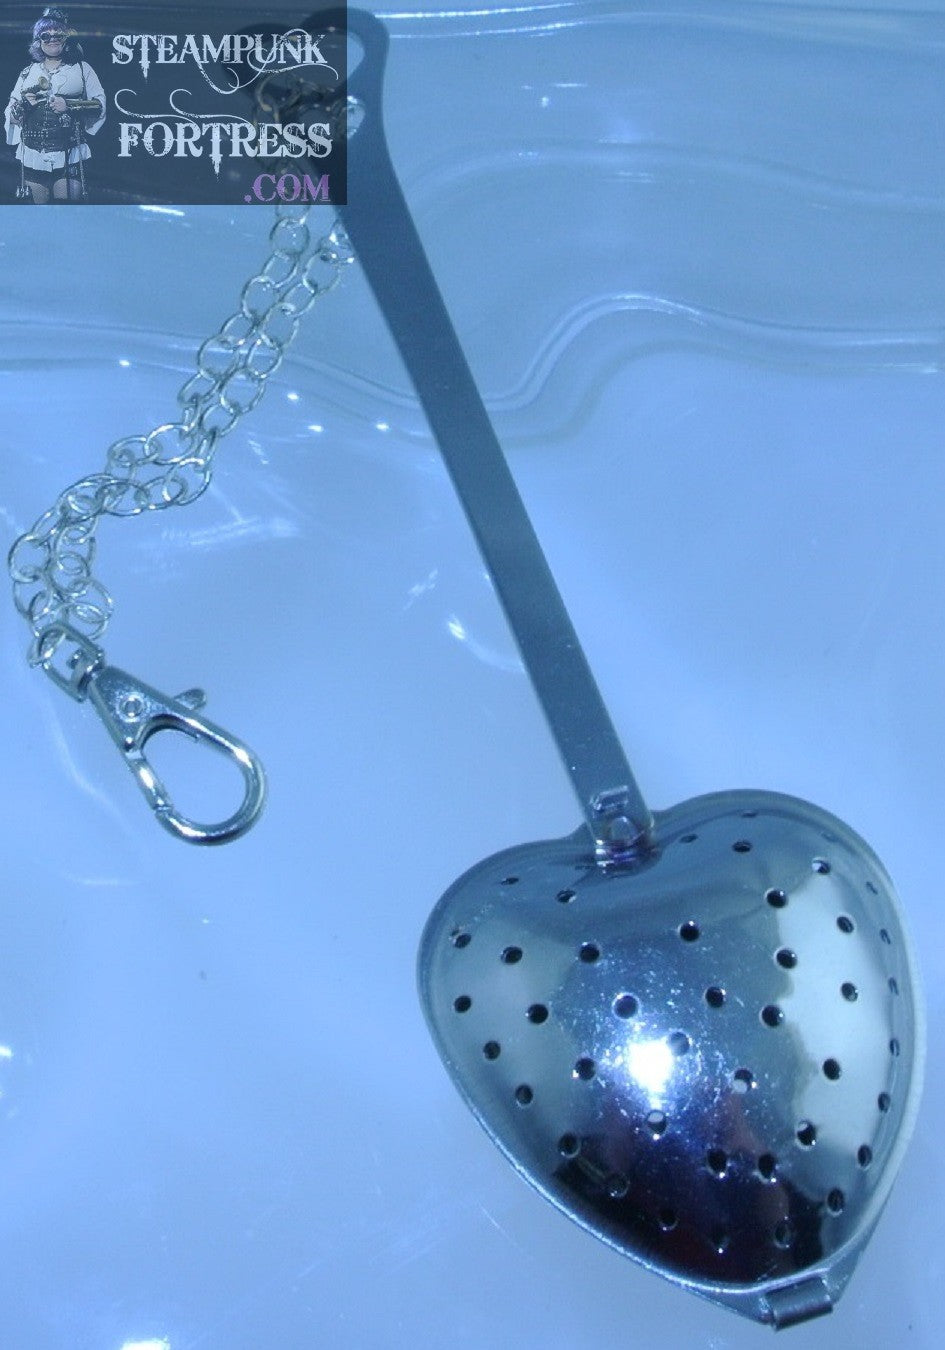 SILVER SPOON STRAINER STIRRER INFUSER HEART SHAPED TEA DUELING CLASP CLIP CHAIN STARR WILDE STEAMPUNK FORTRESS